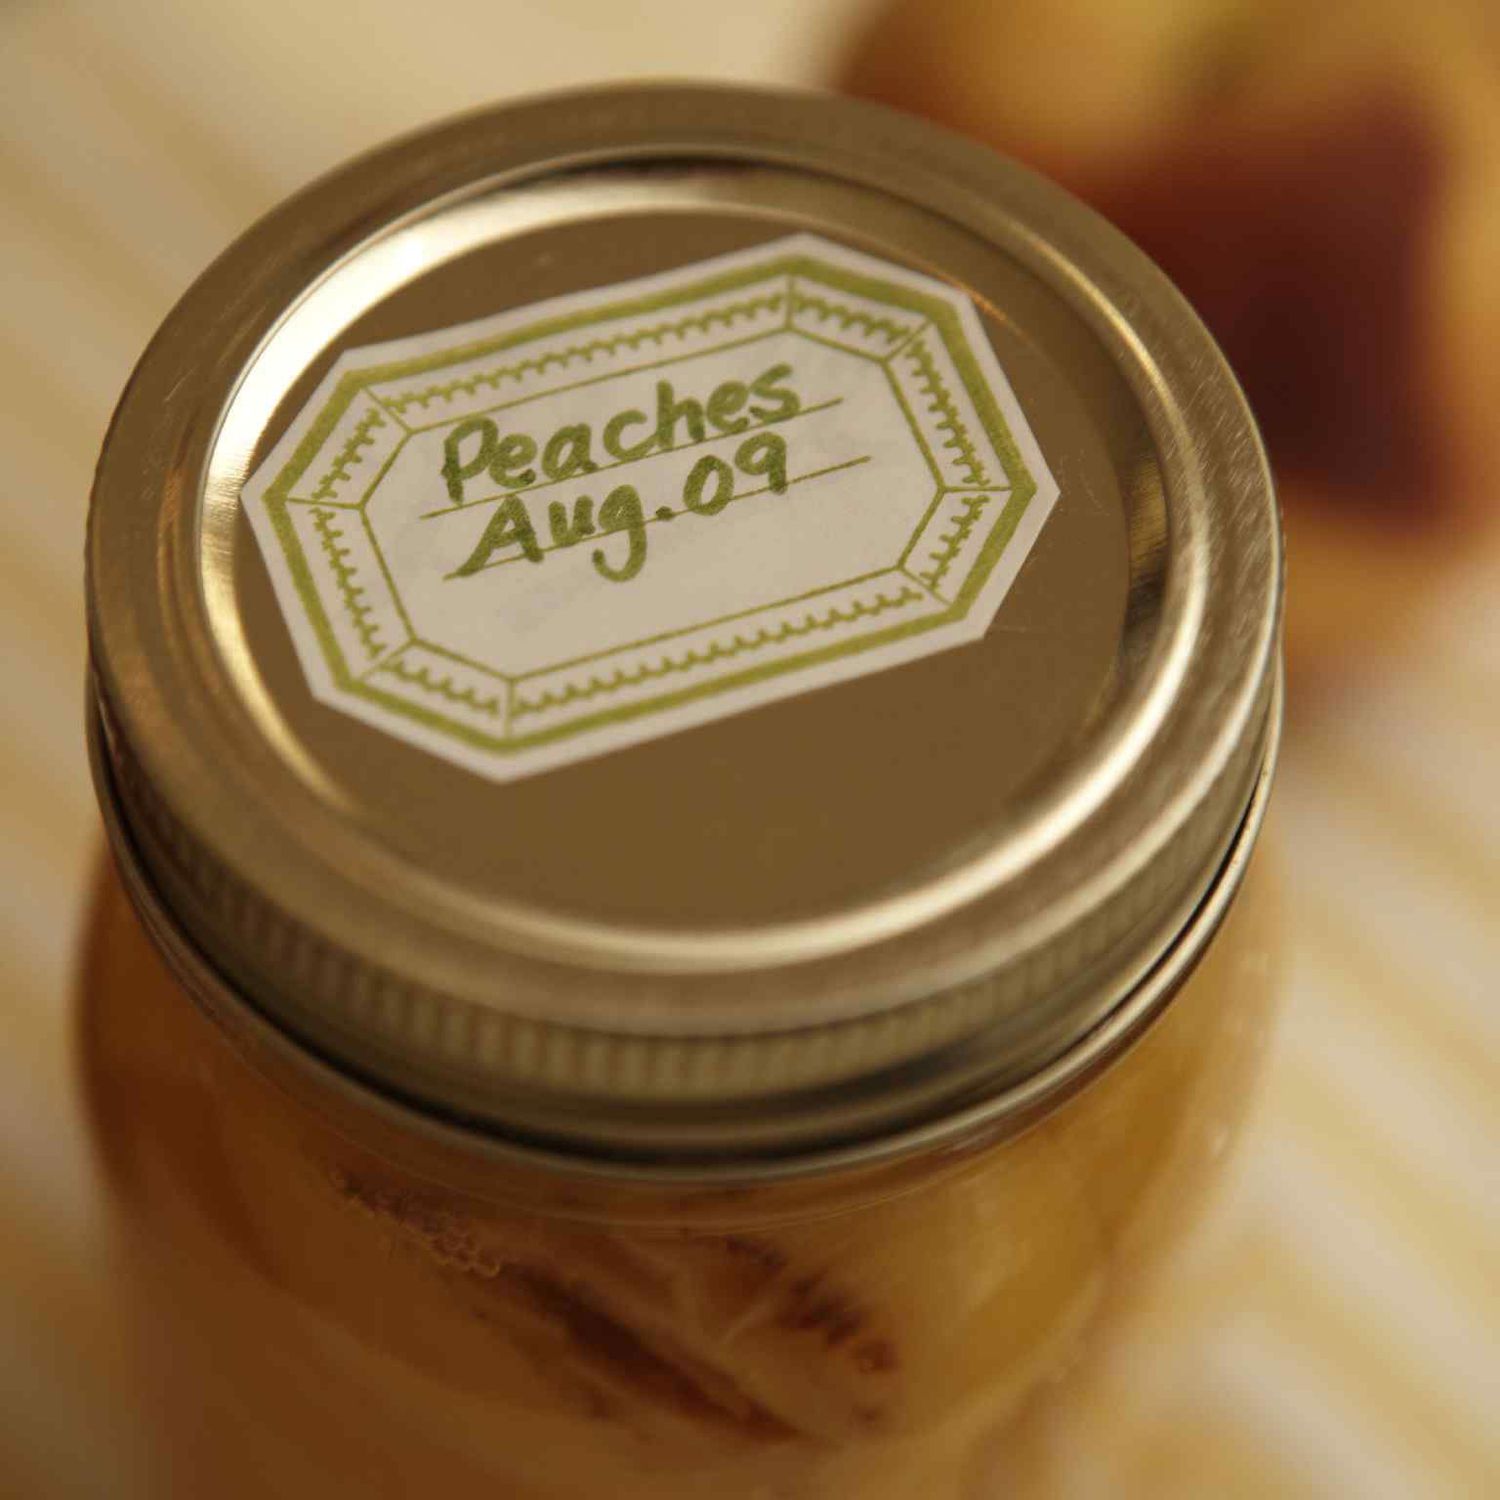 Close up of lid on jar of peaches with label